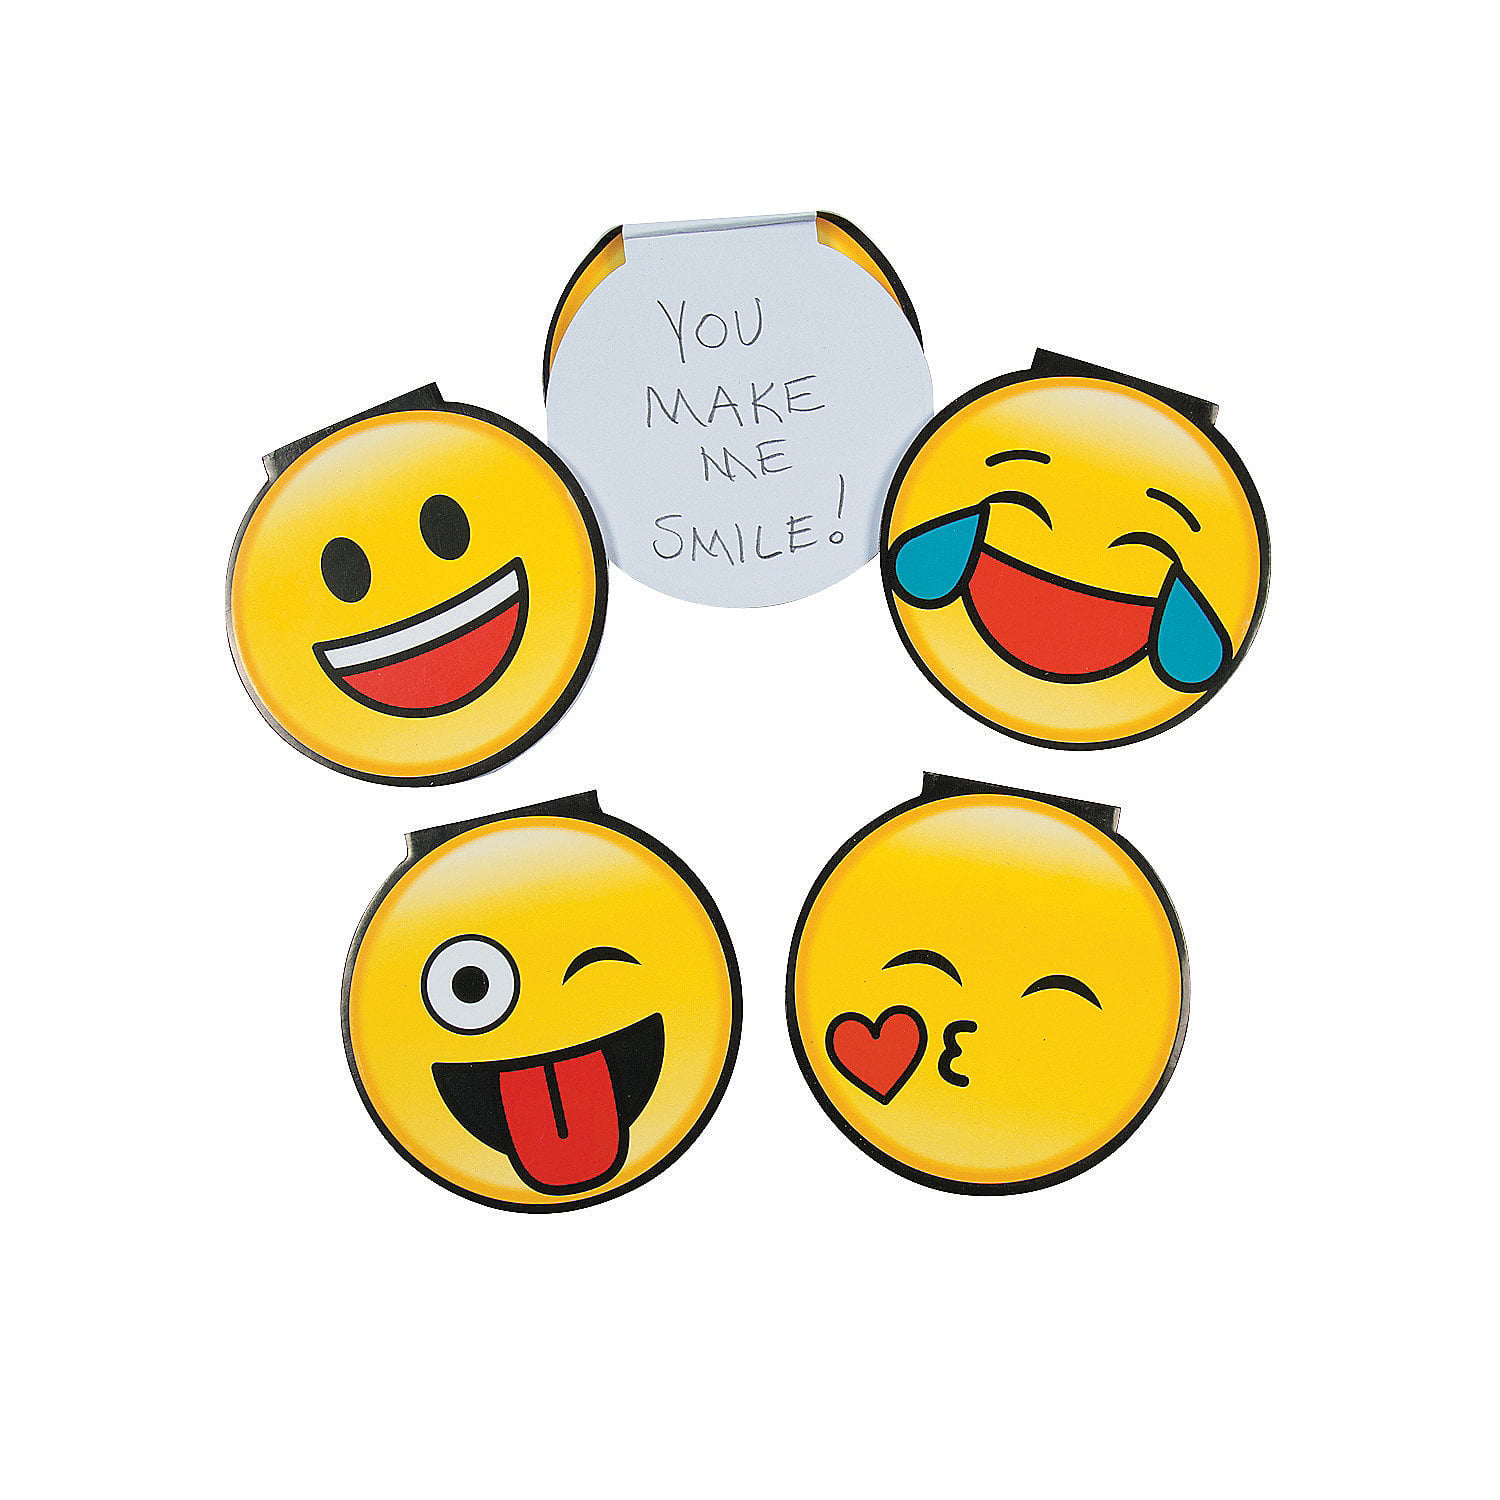 Stationery Supplies for School and Office for Kids and Adults Small Emoji Note Memo Pads with Colorful Rainbow Covers ArtCreativity Mini Smile Face Notepads Cute Party Favors Pack of 12 